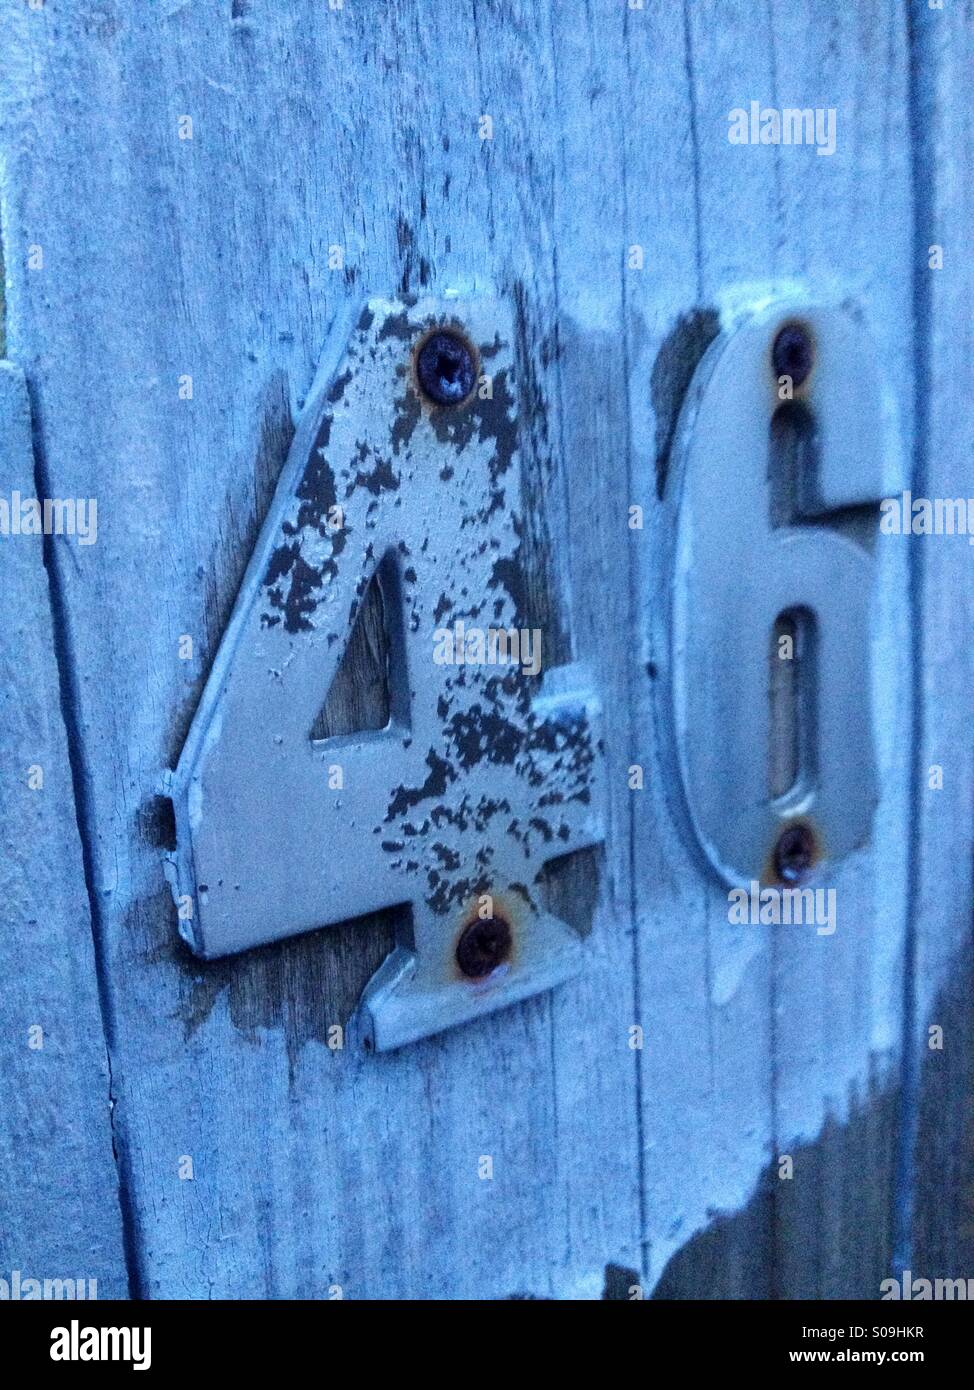 House number 46 rusted and painted on wood Stock Photo